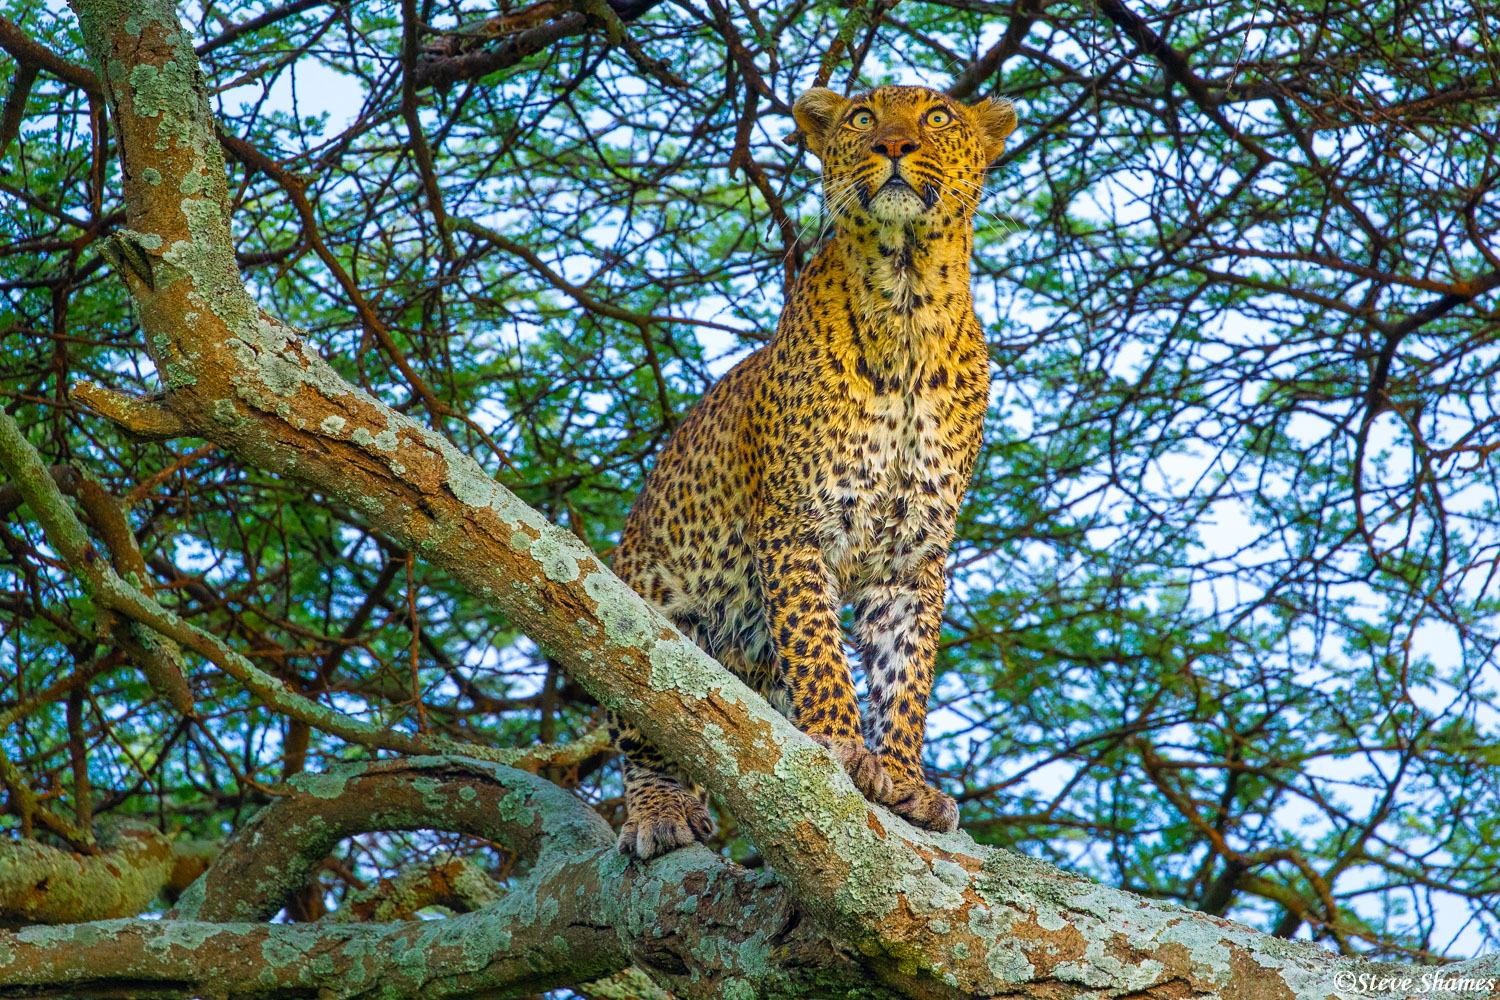 Here is the female leopard finding refuge in a tree from an aggressive male leopard on the ground. If a male leopard detects...